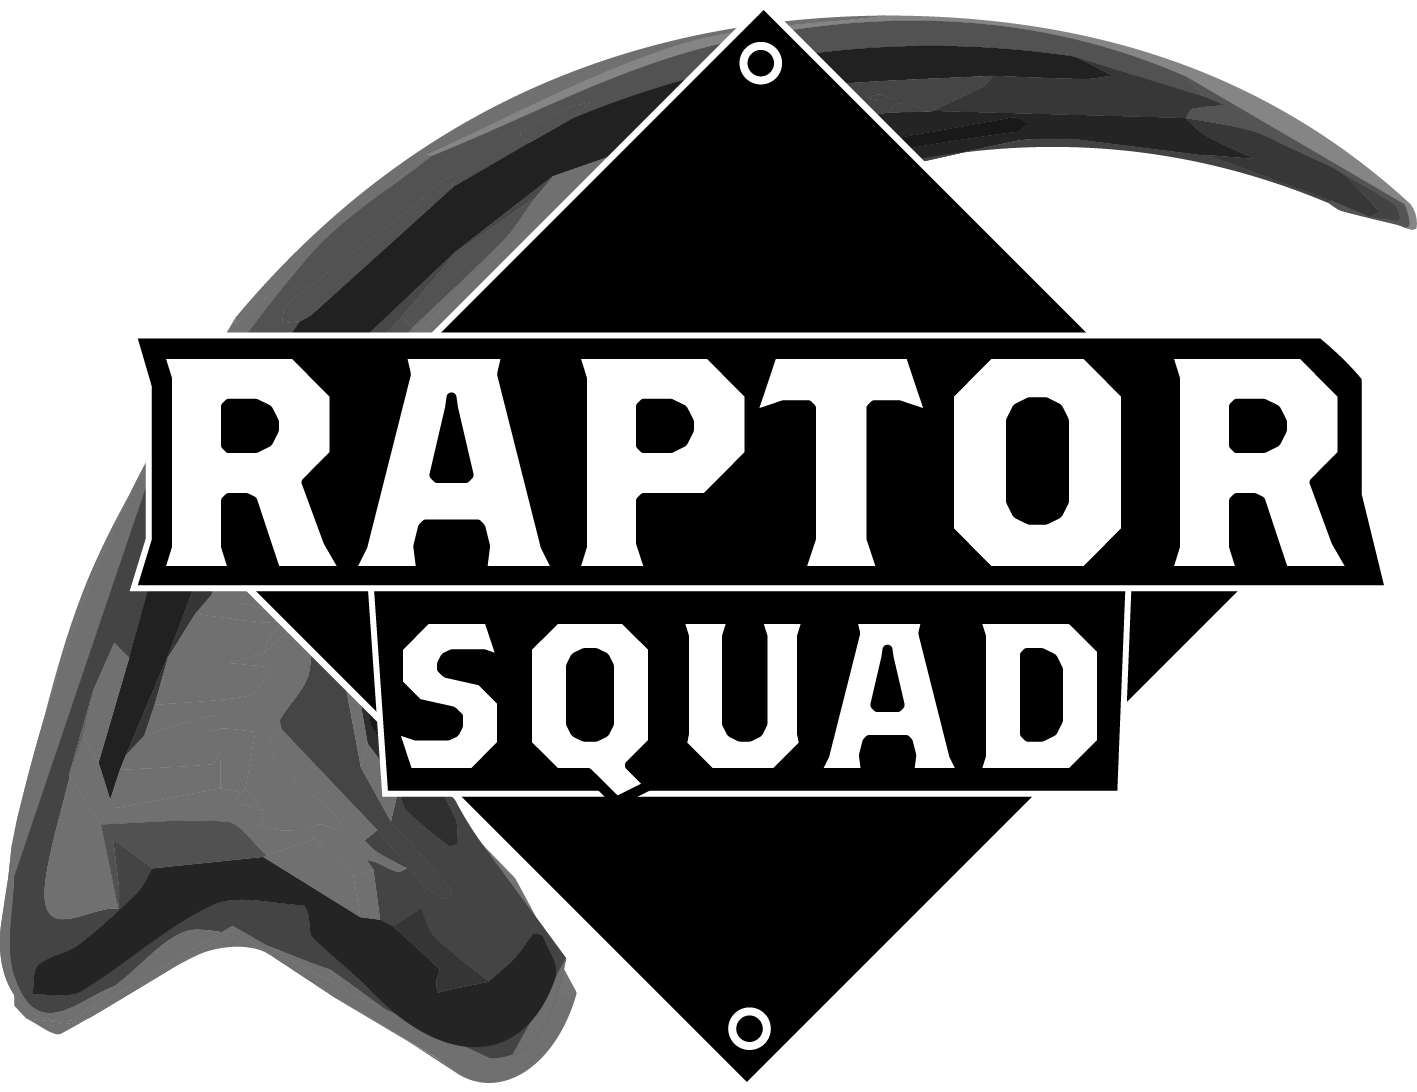 A giant sharp tooth next to a black diamond with text "Raptor Squad"